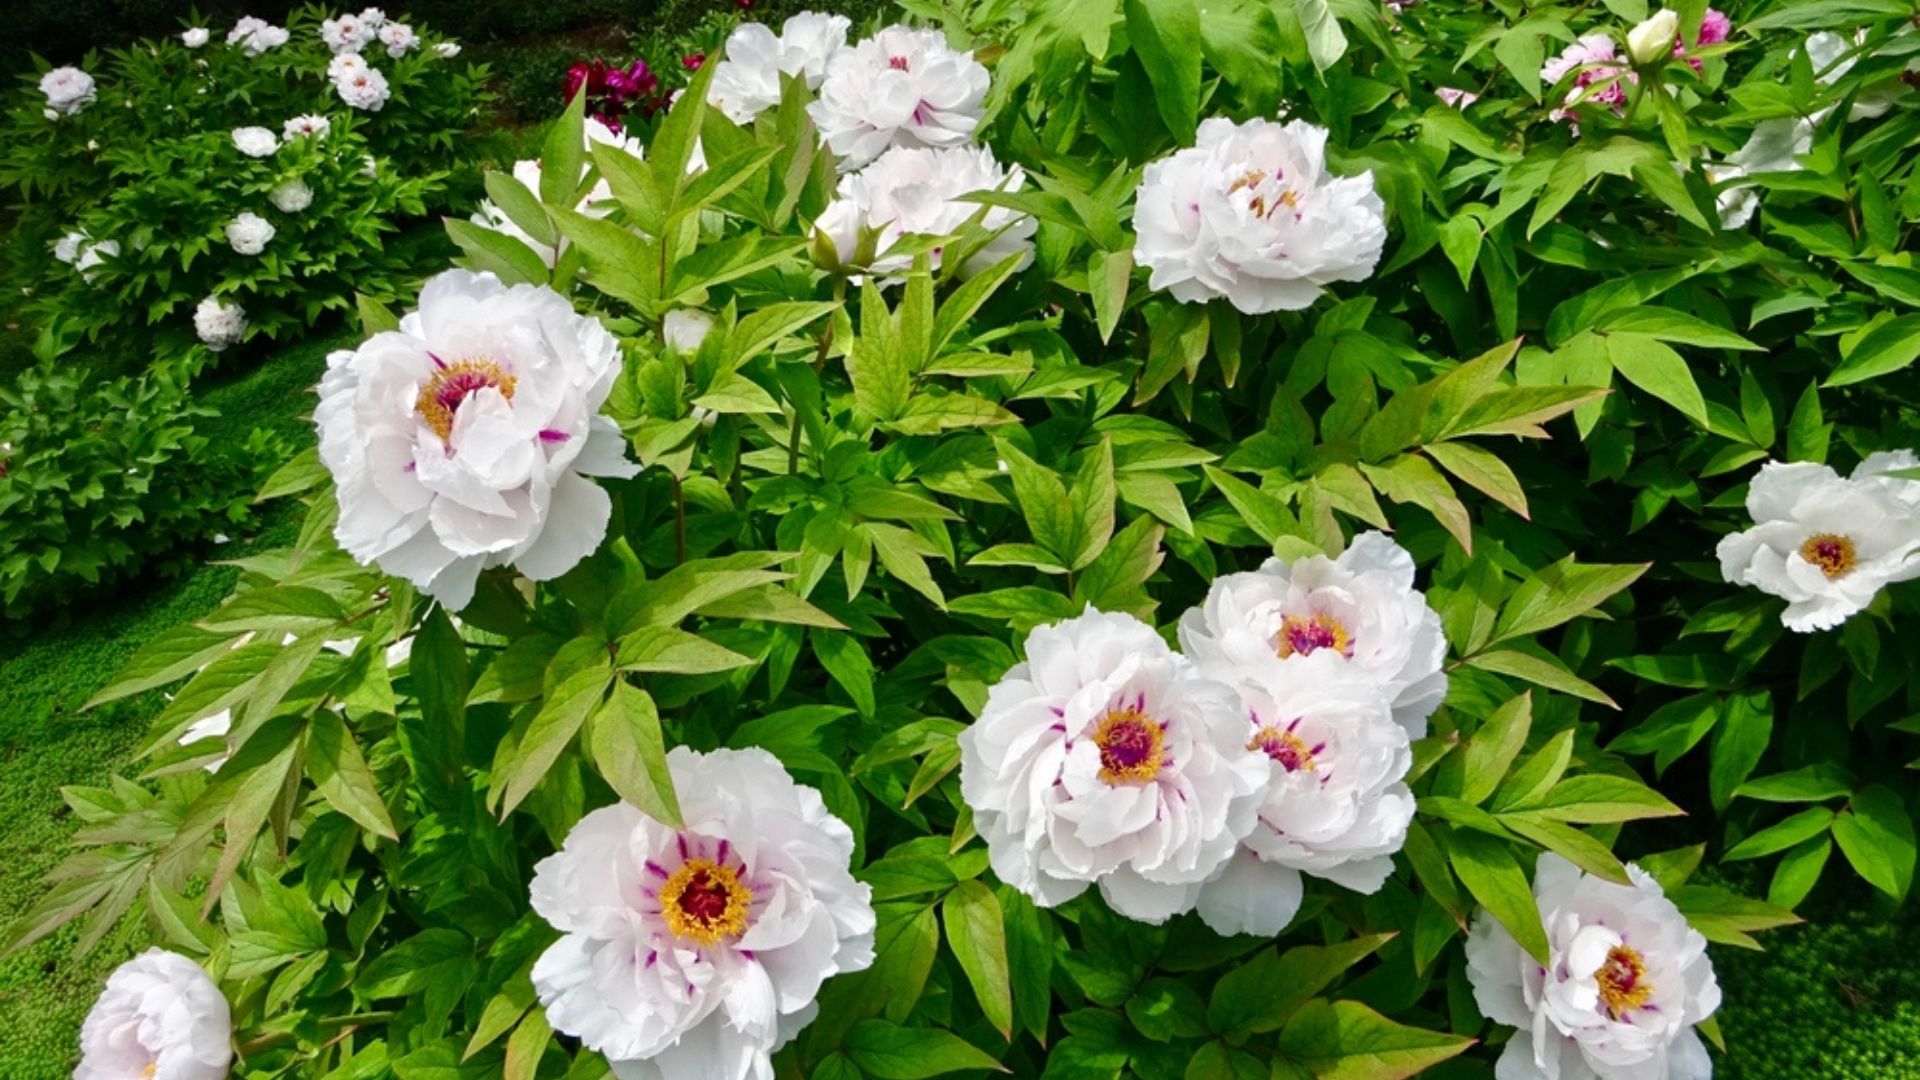 Use These Tips To Grow A Tree Peony And Get An Abundance Of Show-Stopping Blossoms